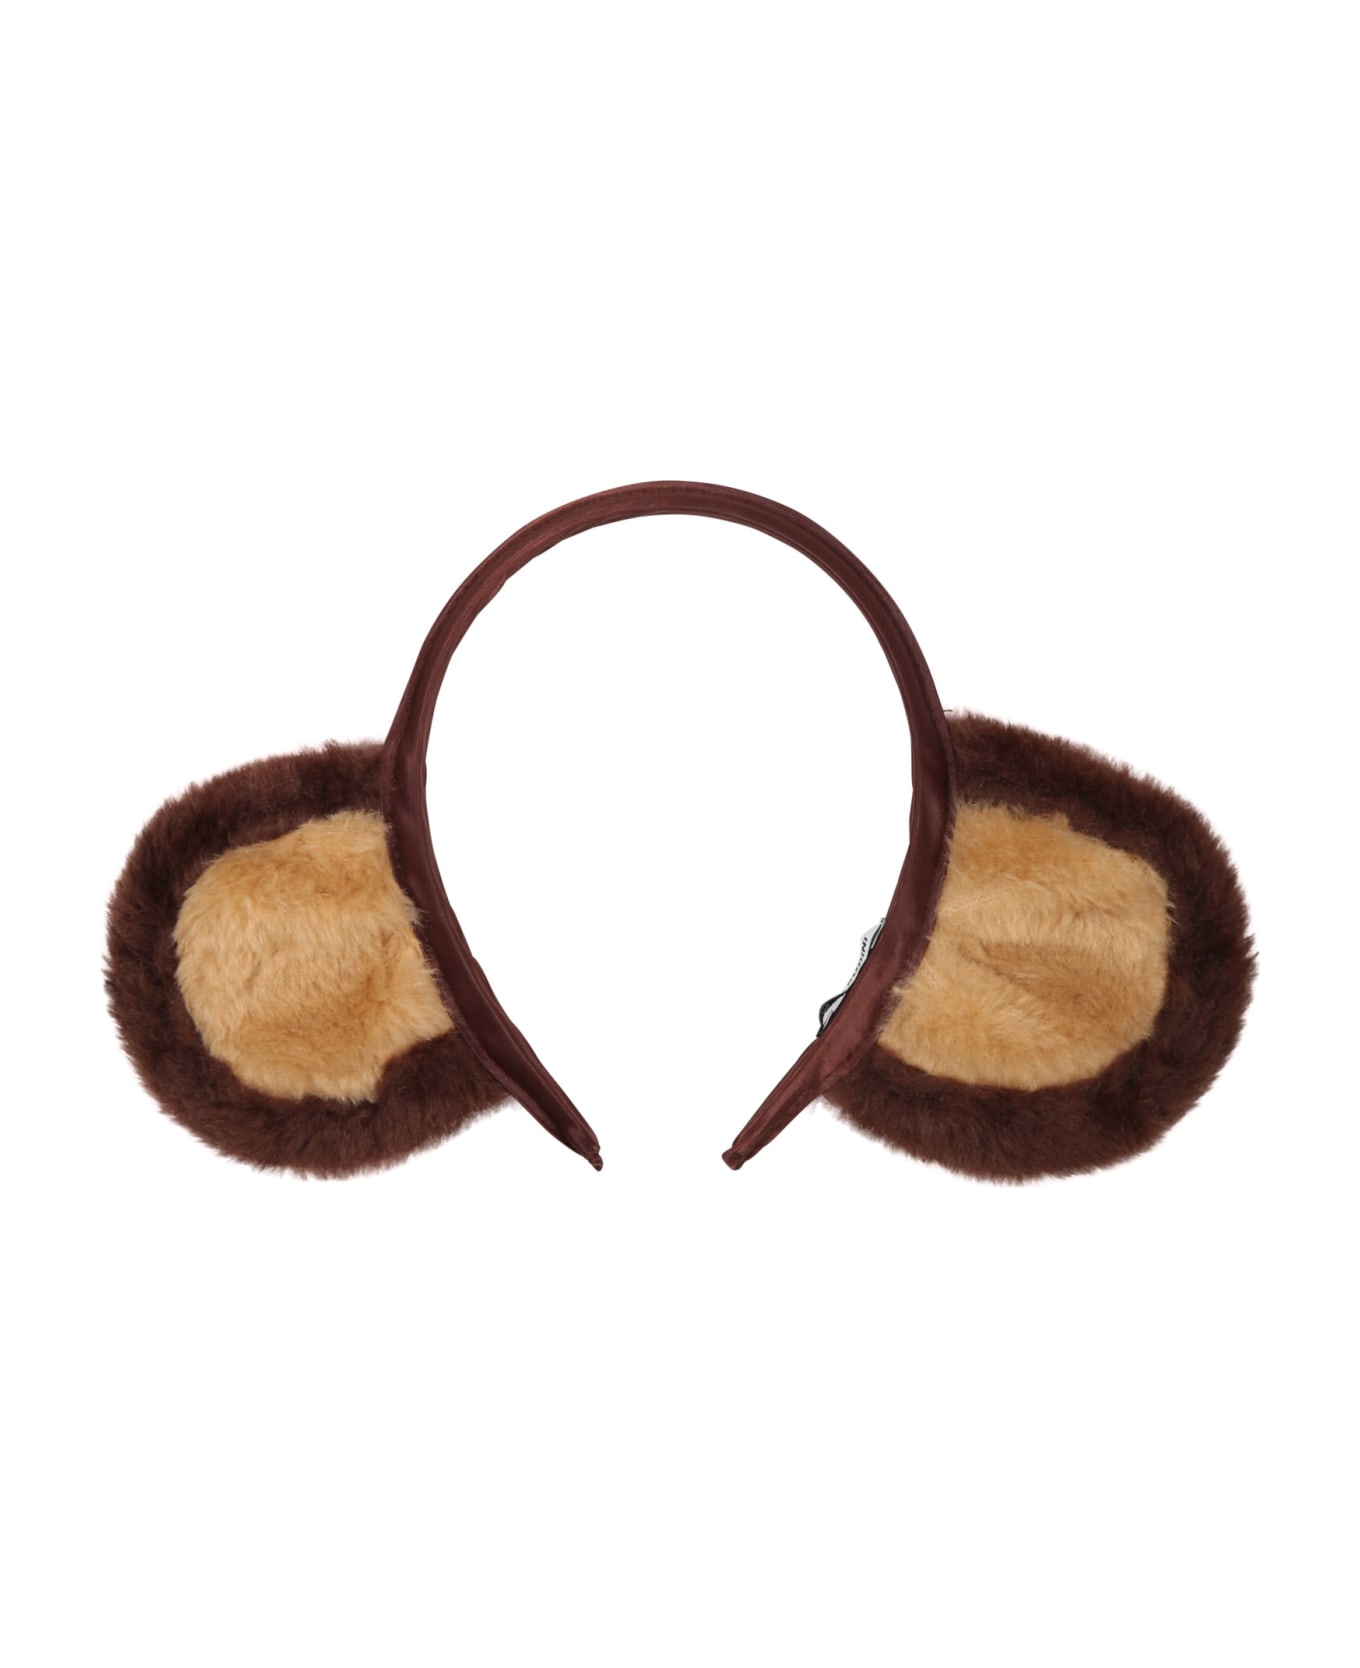 Mini Rodini Brown Headband For Girl With Ears - Brown アクセサリー＆ギフト